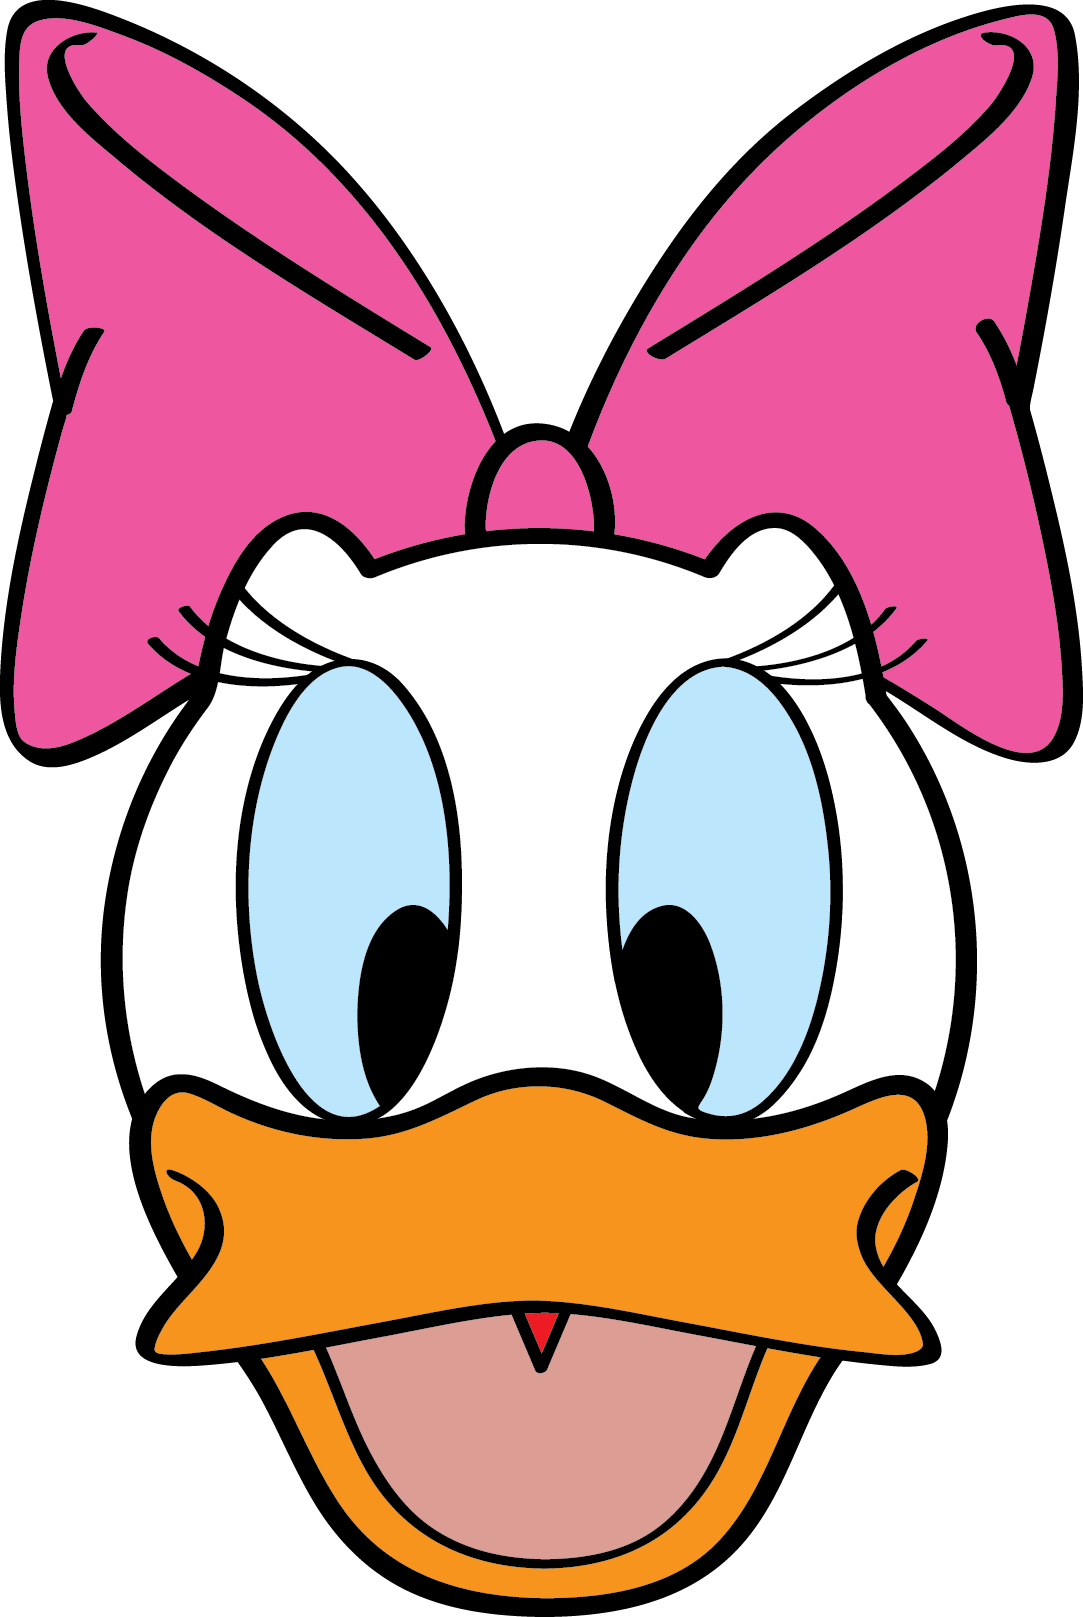 Duck silhouette at getdrawings. Daisy clipart smile